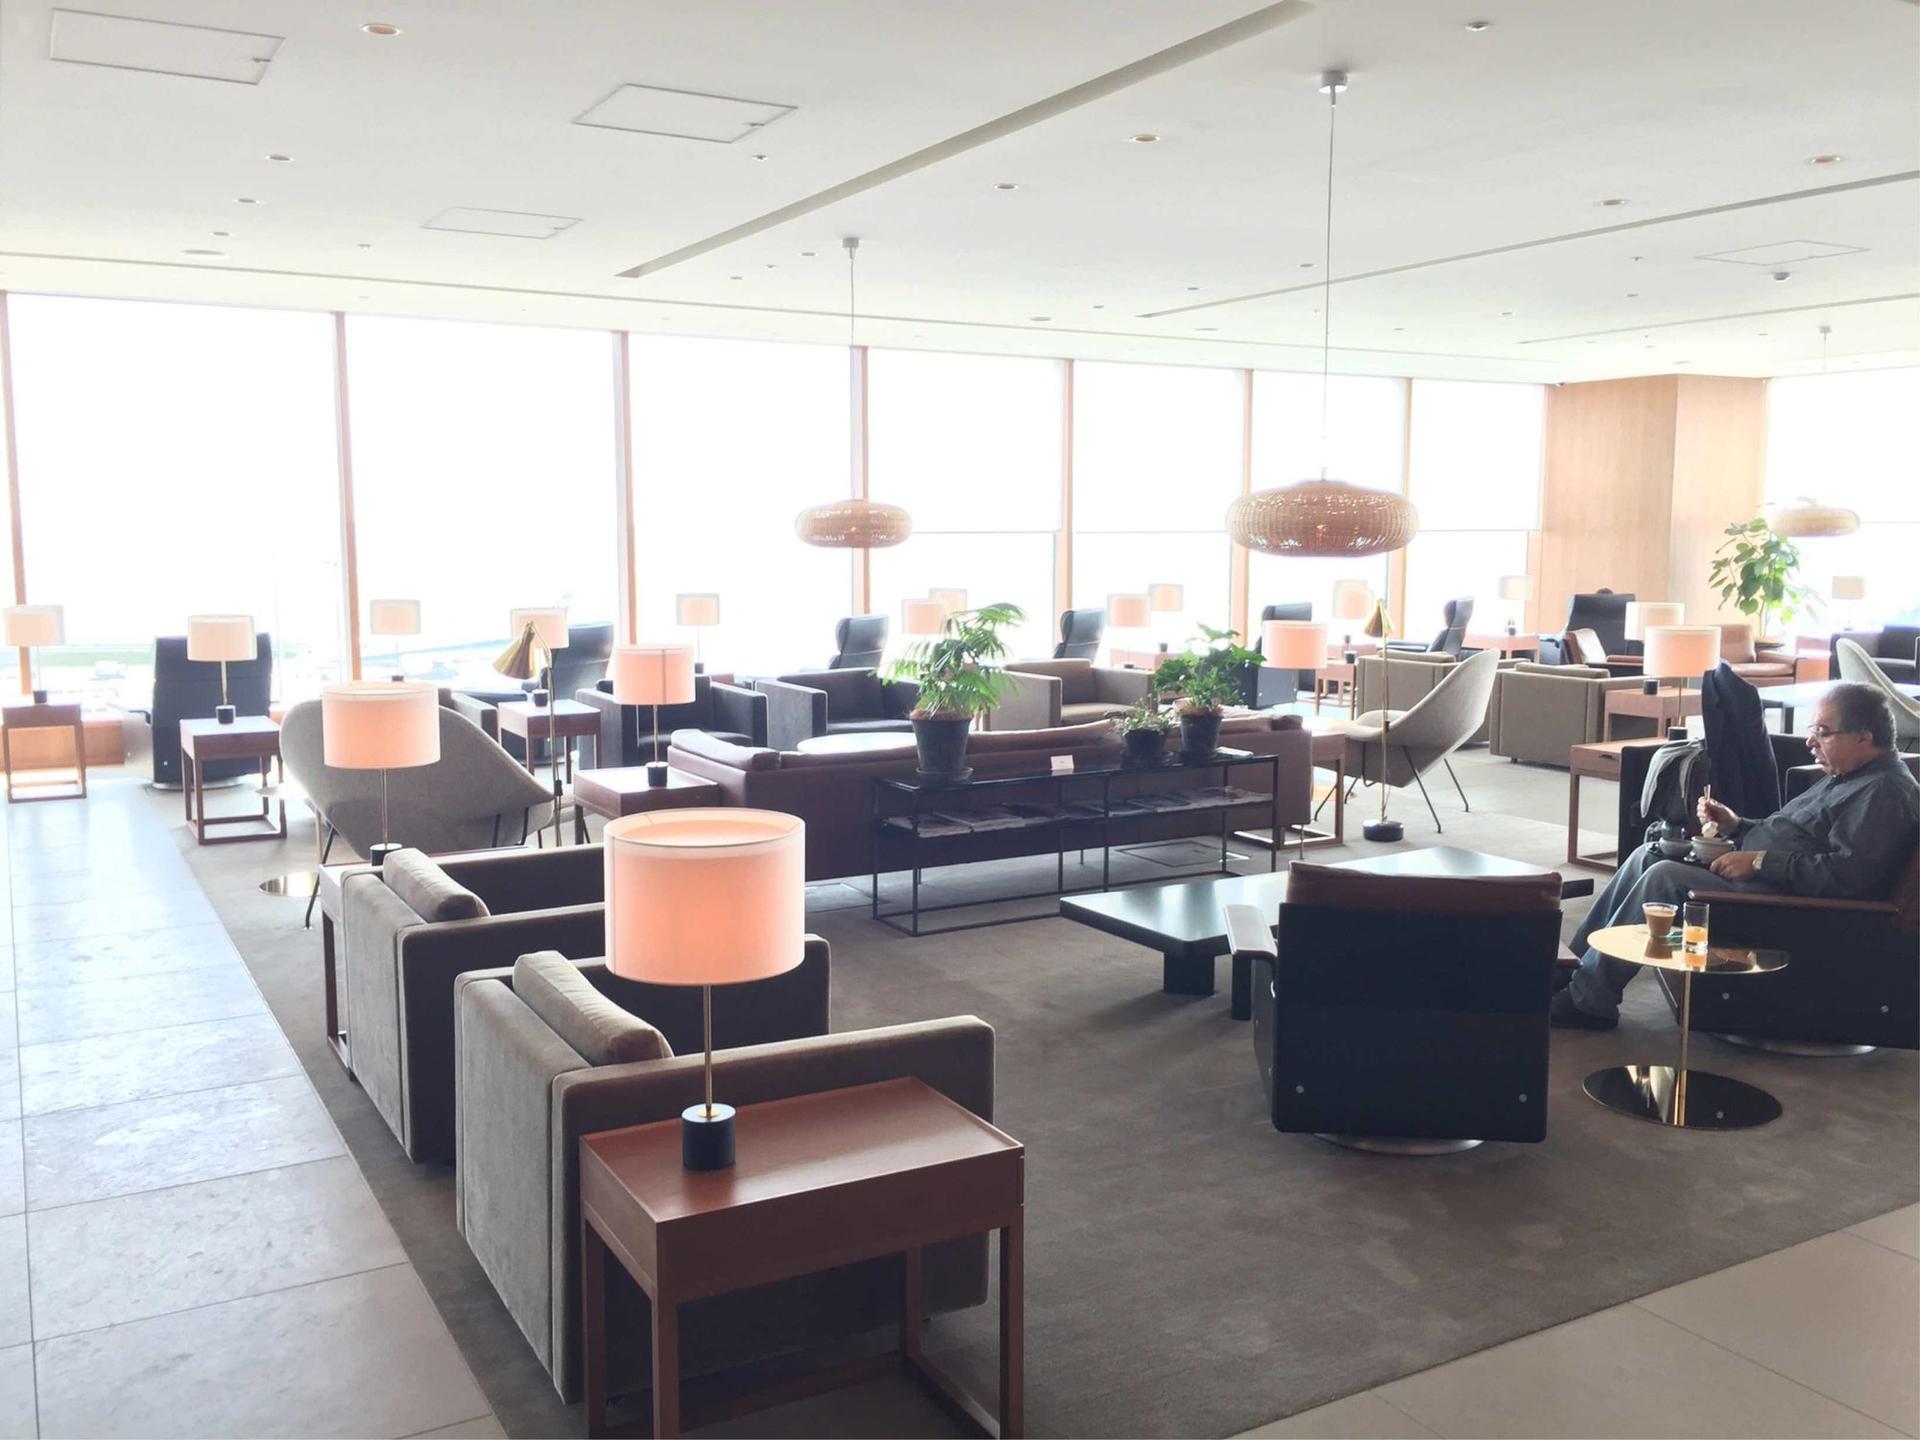 Cathay Pacific Lounge image 38 of 49